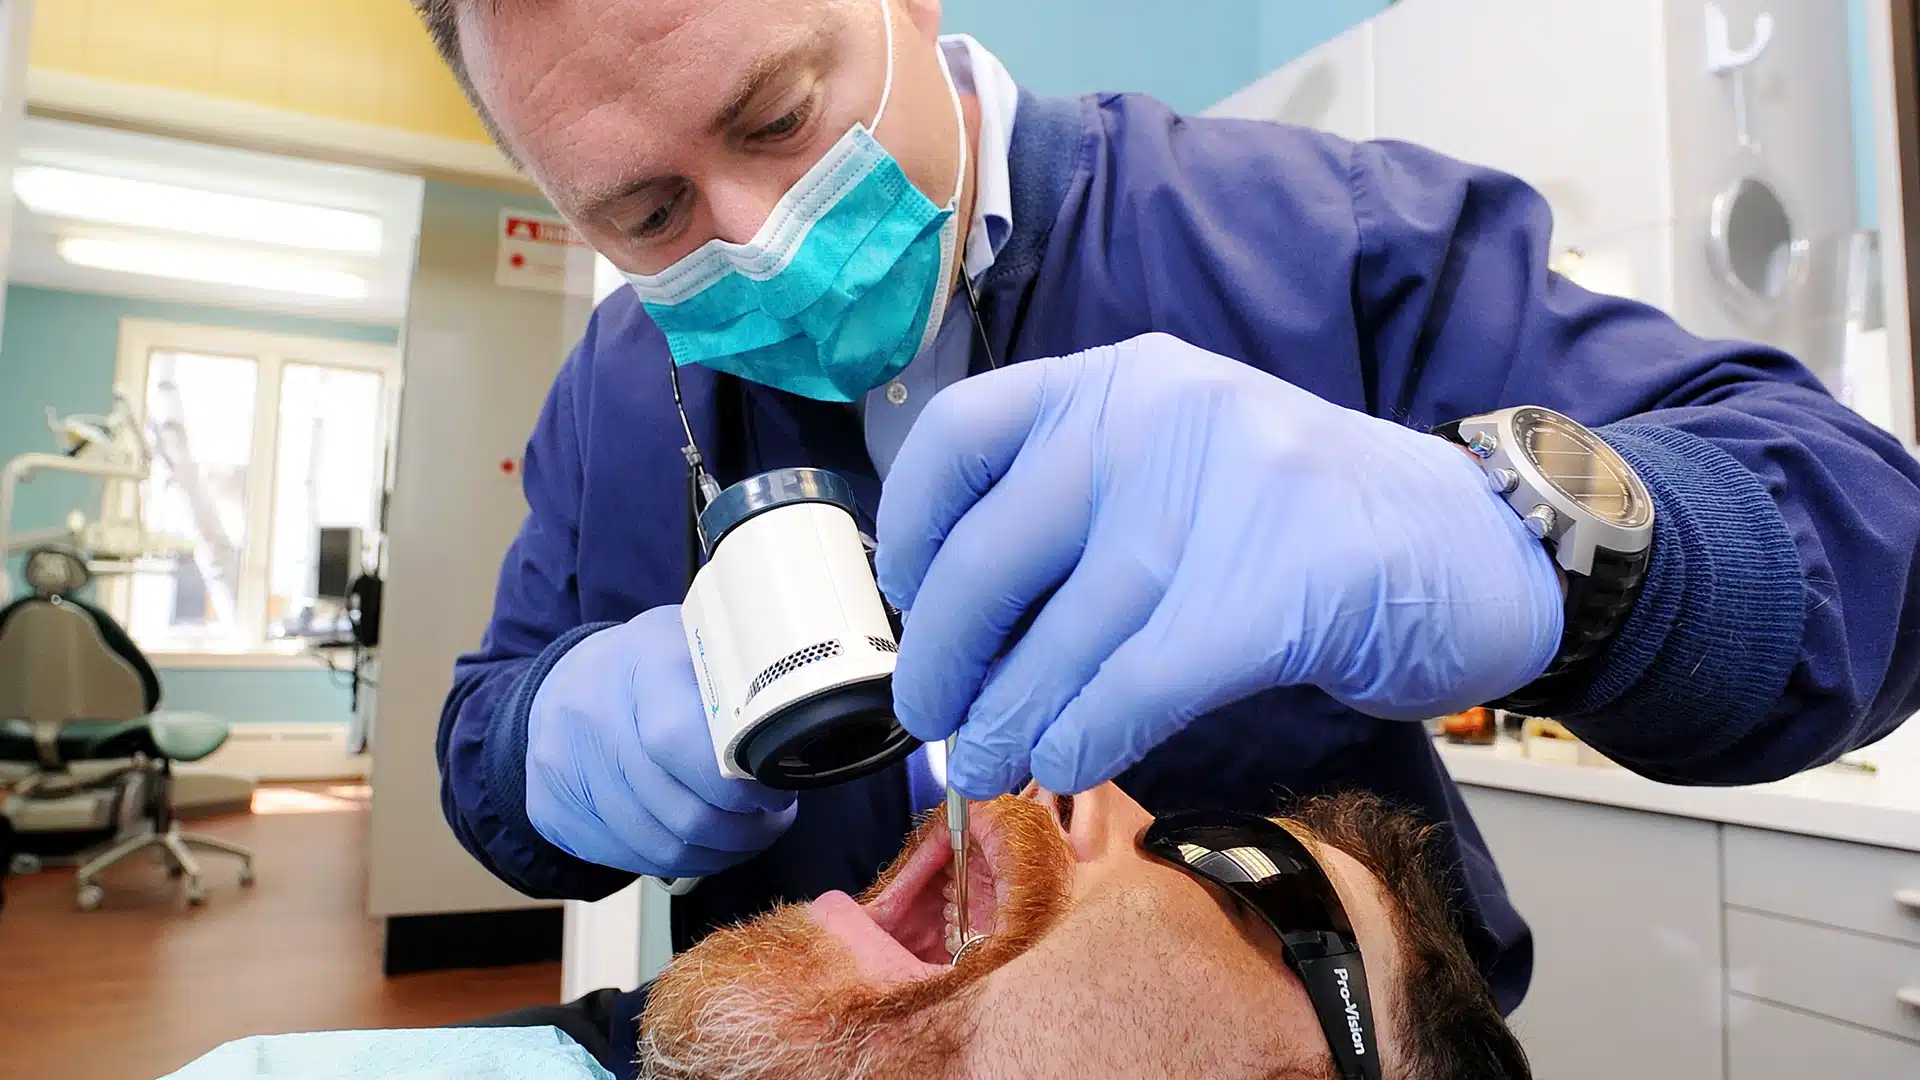 Dr. Drews looking into a patient's mouth with a VELscope enhanced oral cancer examination tool